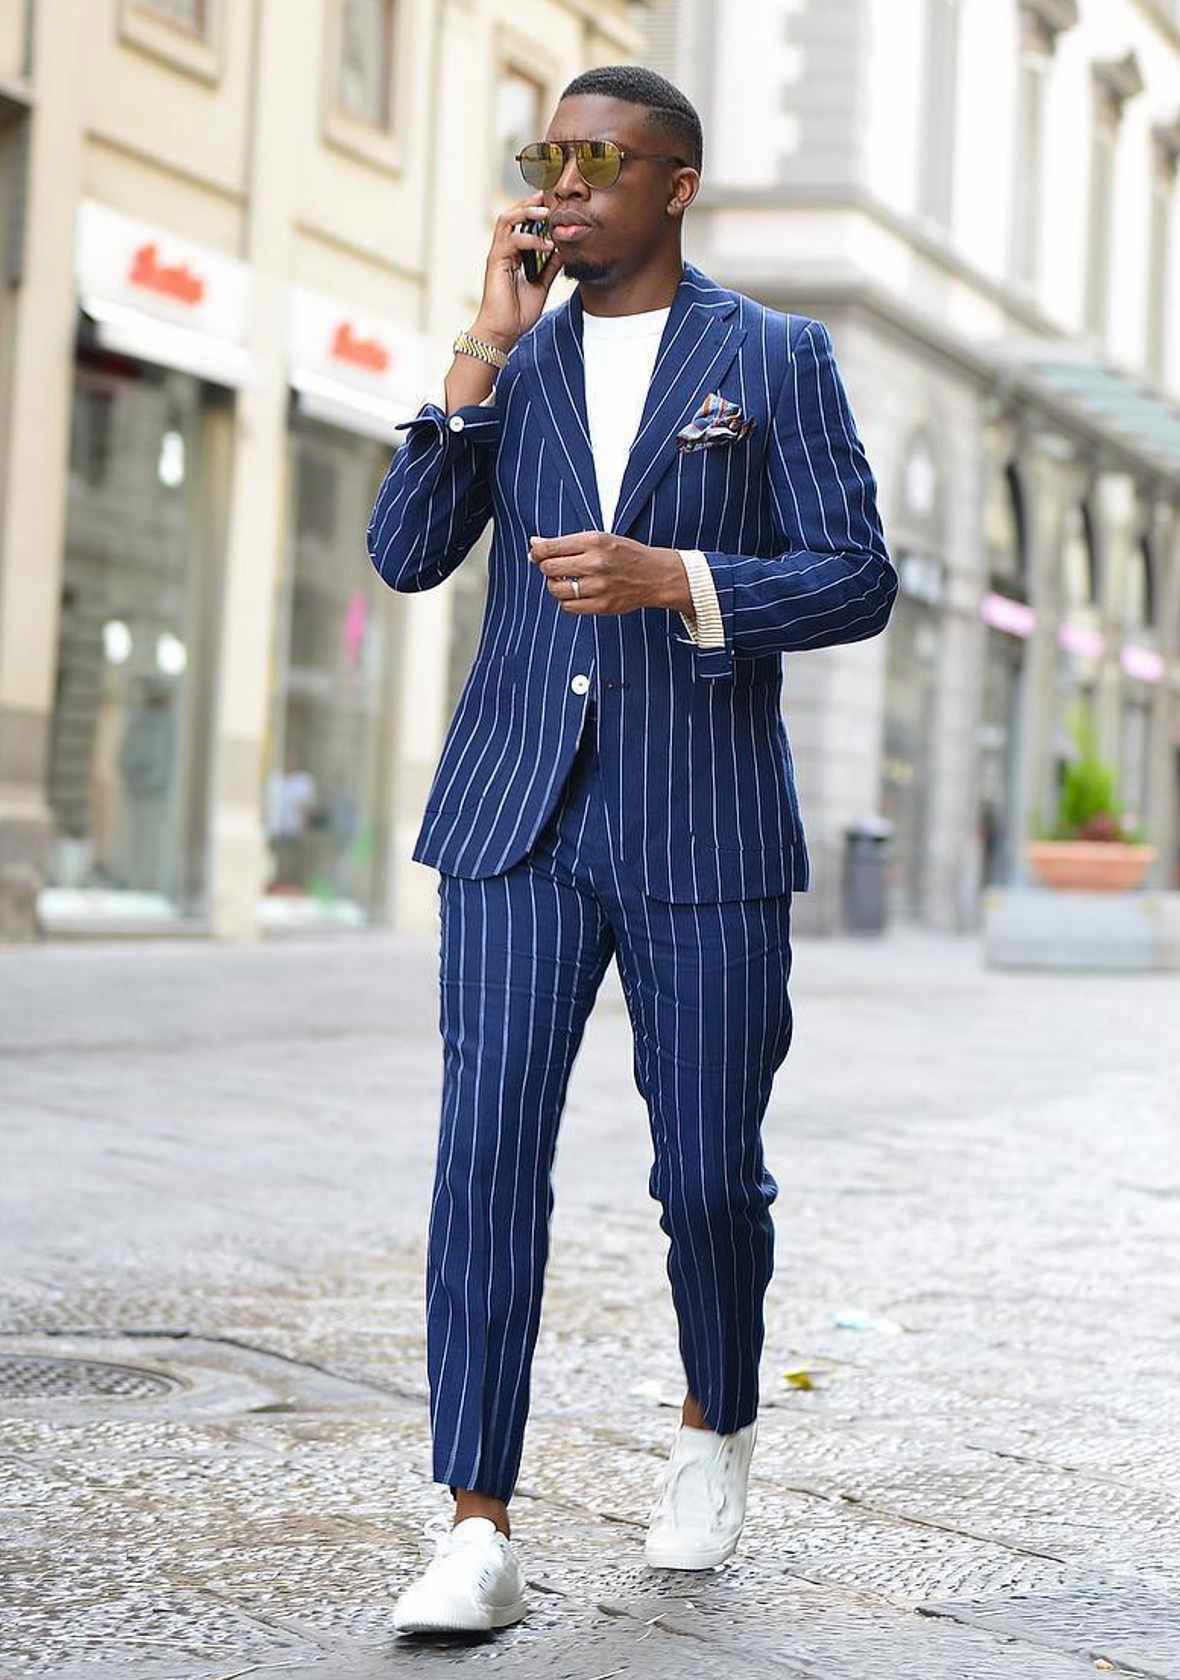 blue pinstripe suit, white t-shirt, and white sneakers